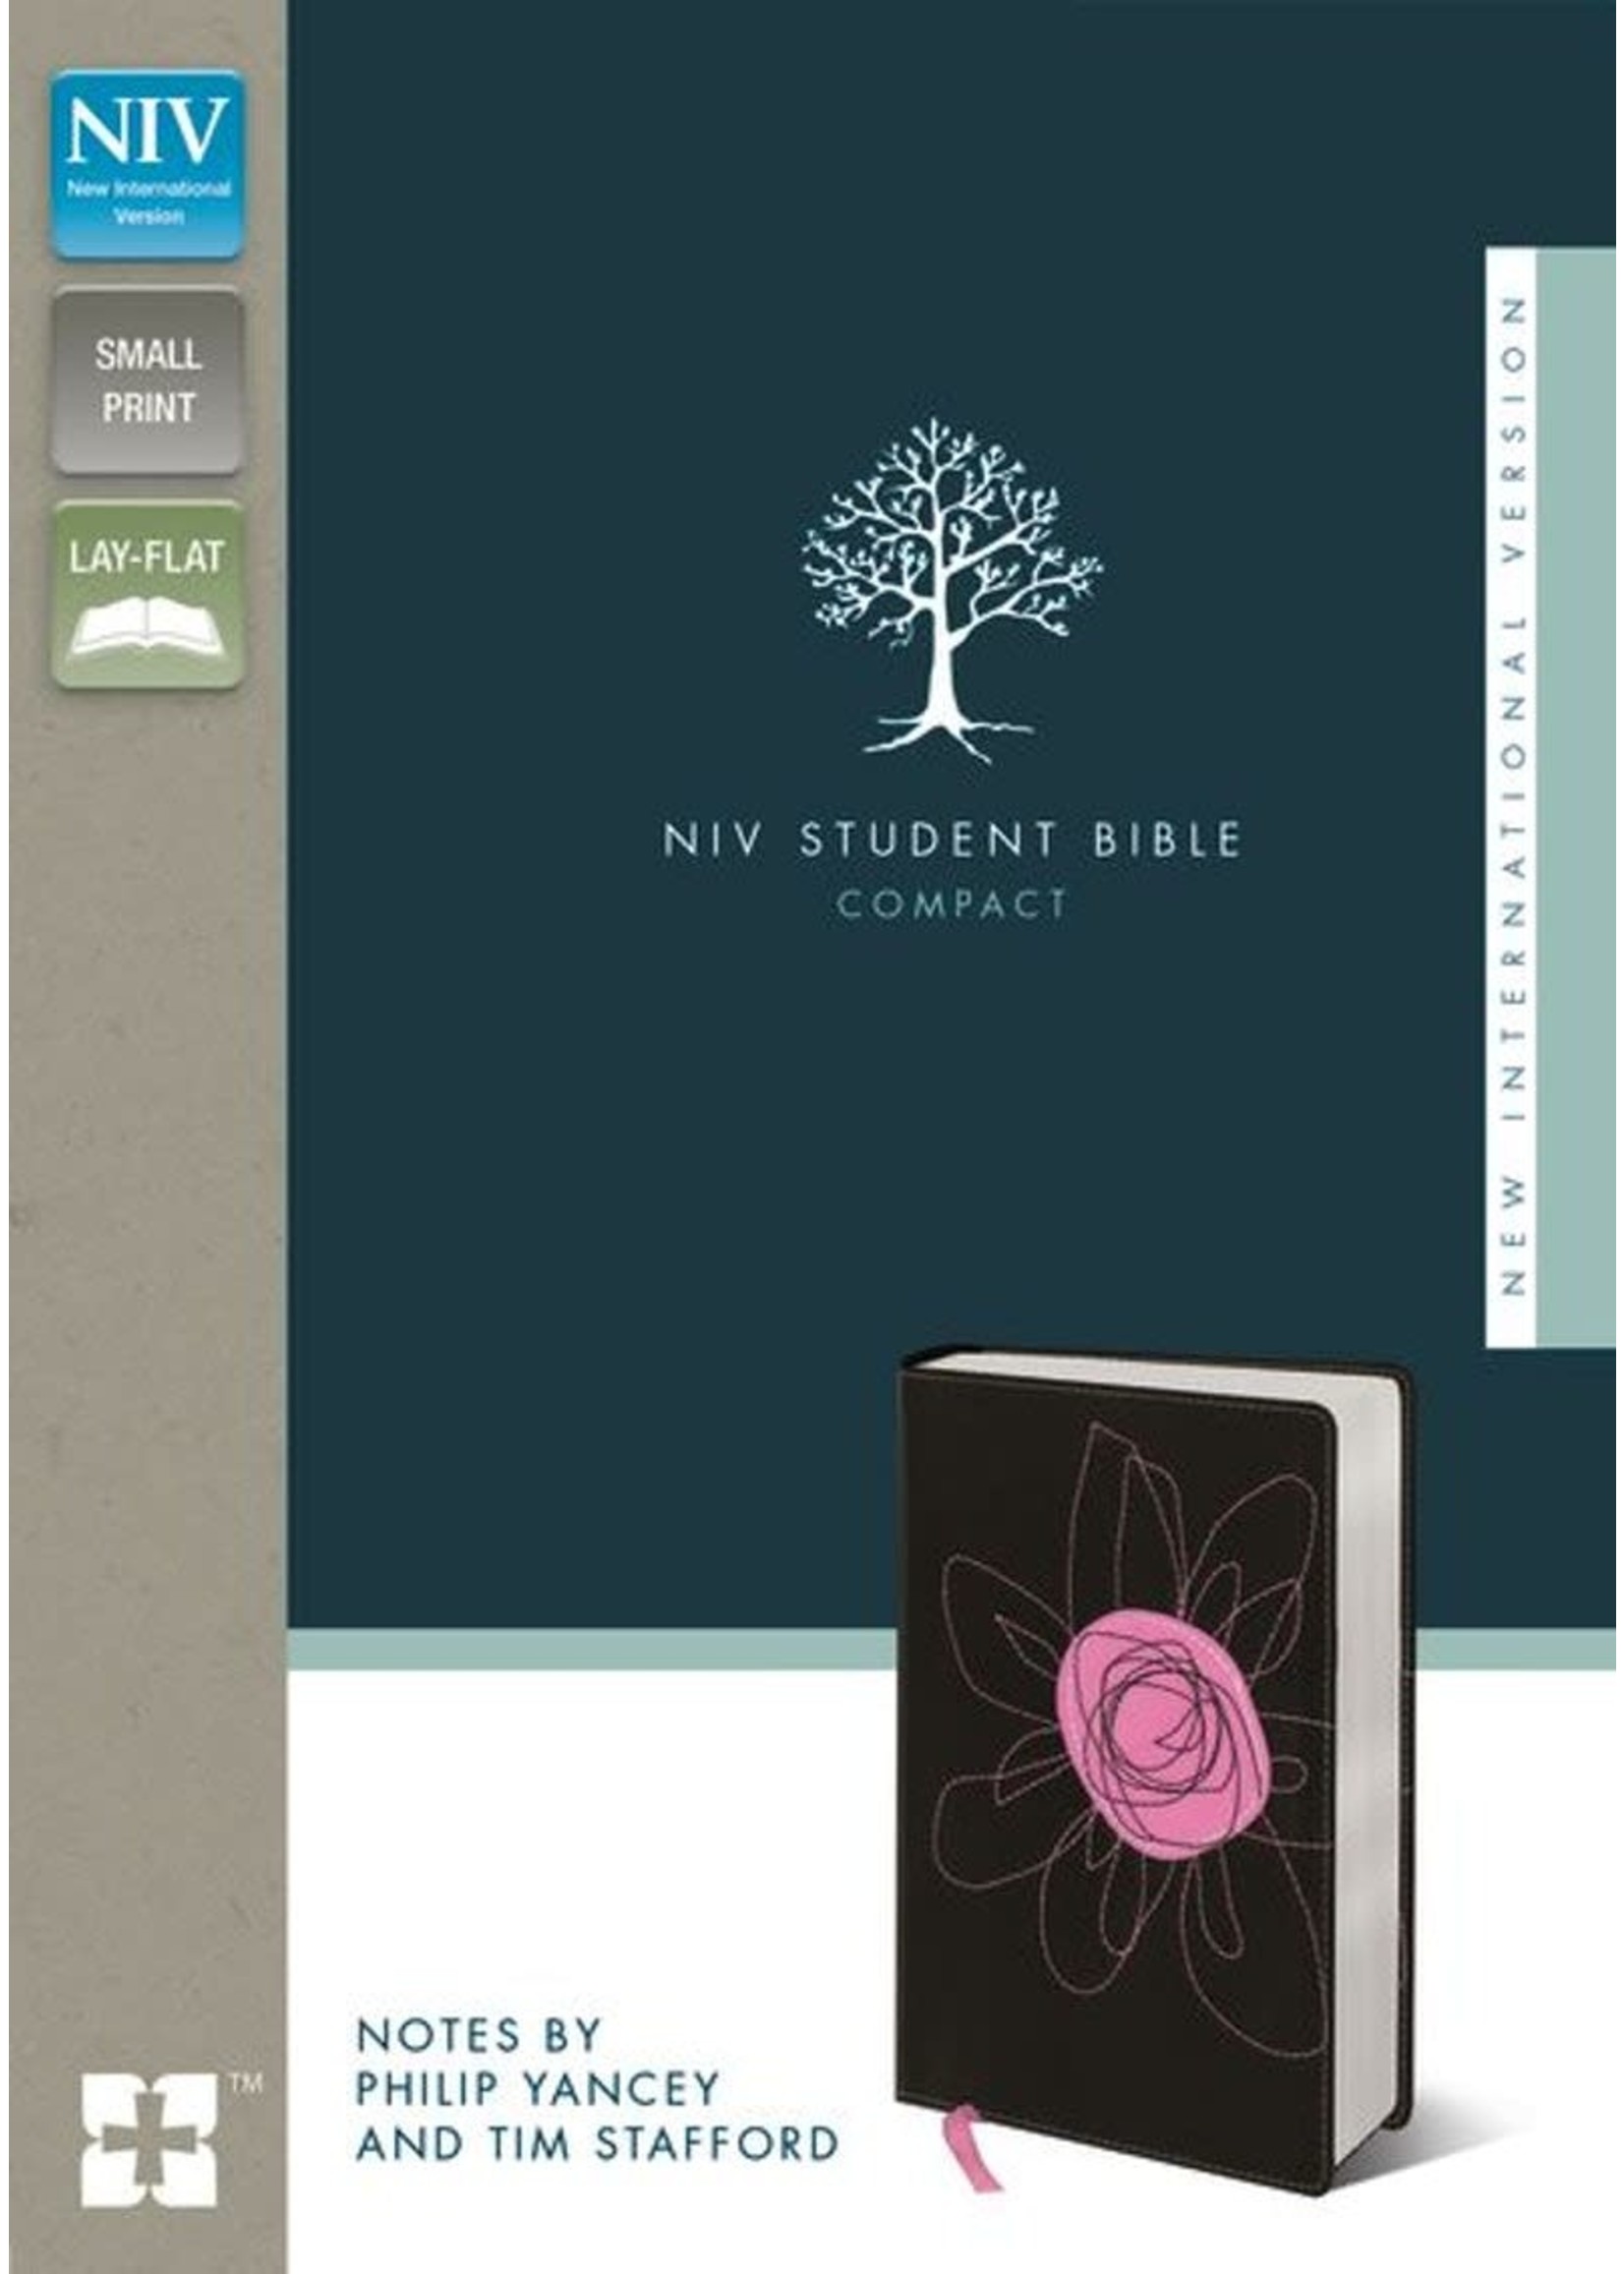 NIV Student Bible with Brown & Pink Flowers